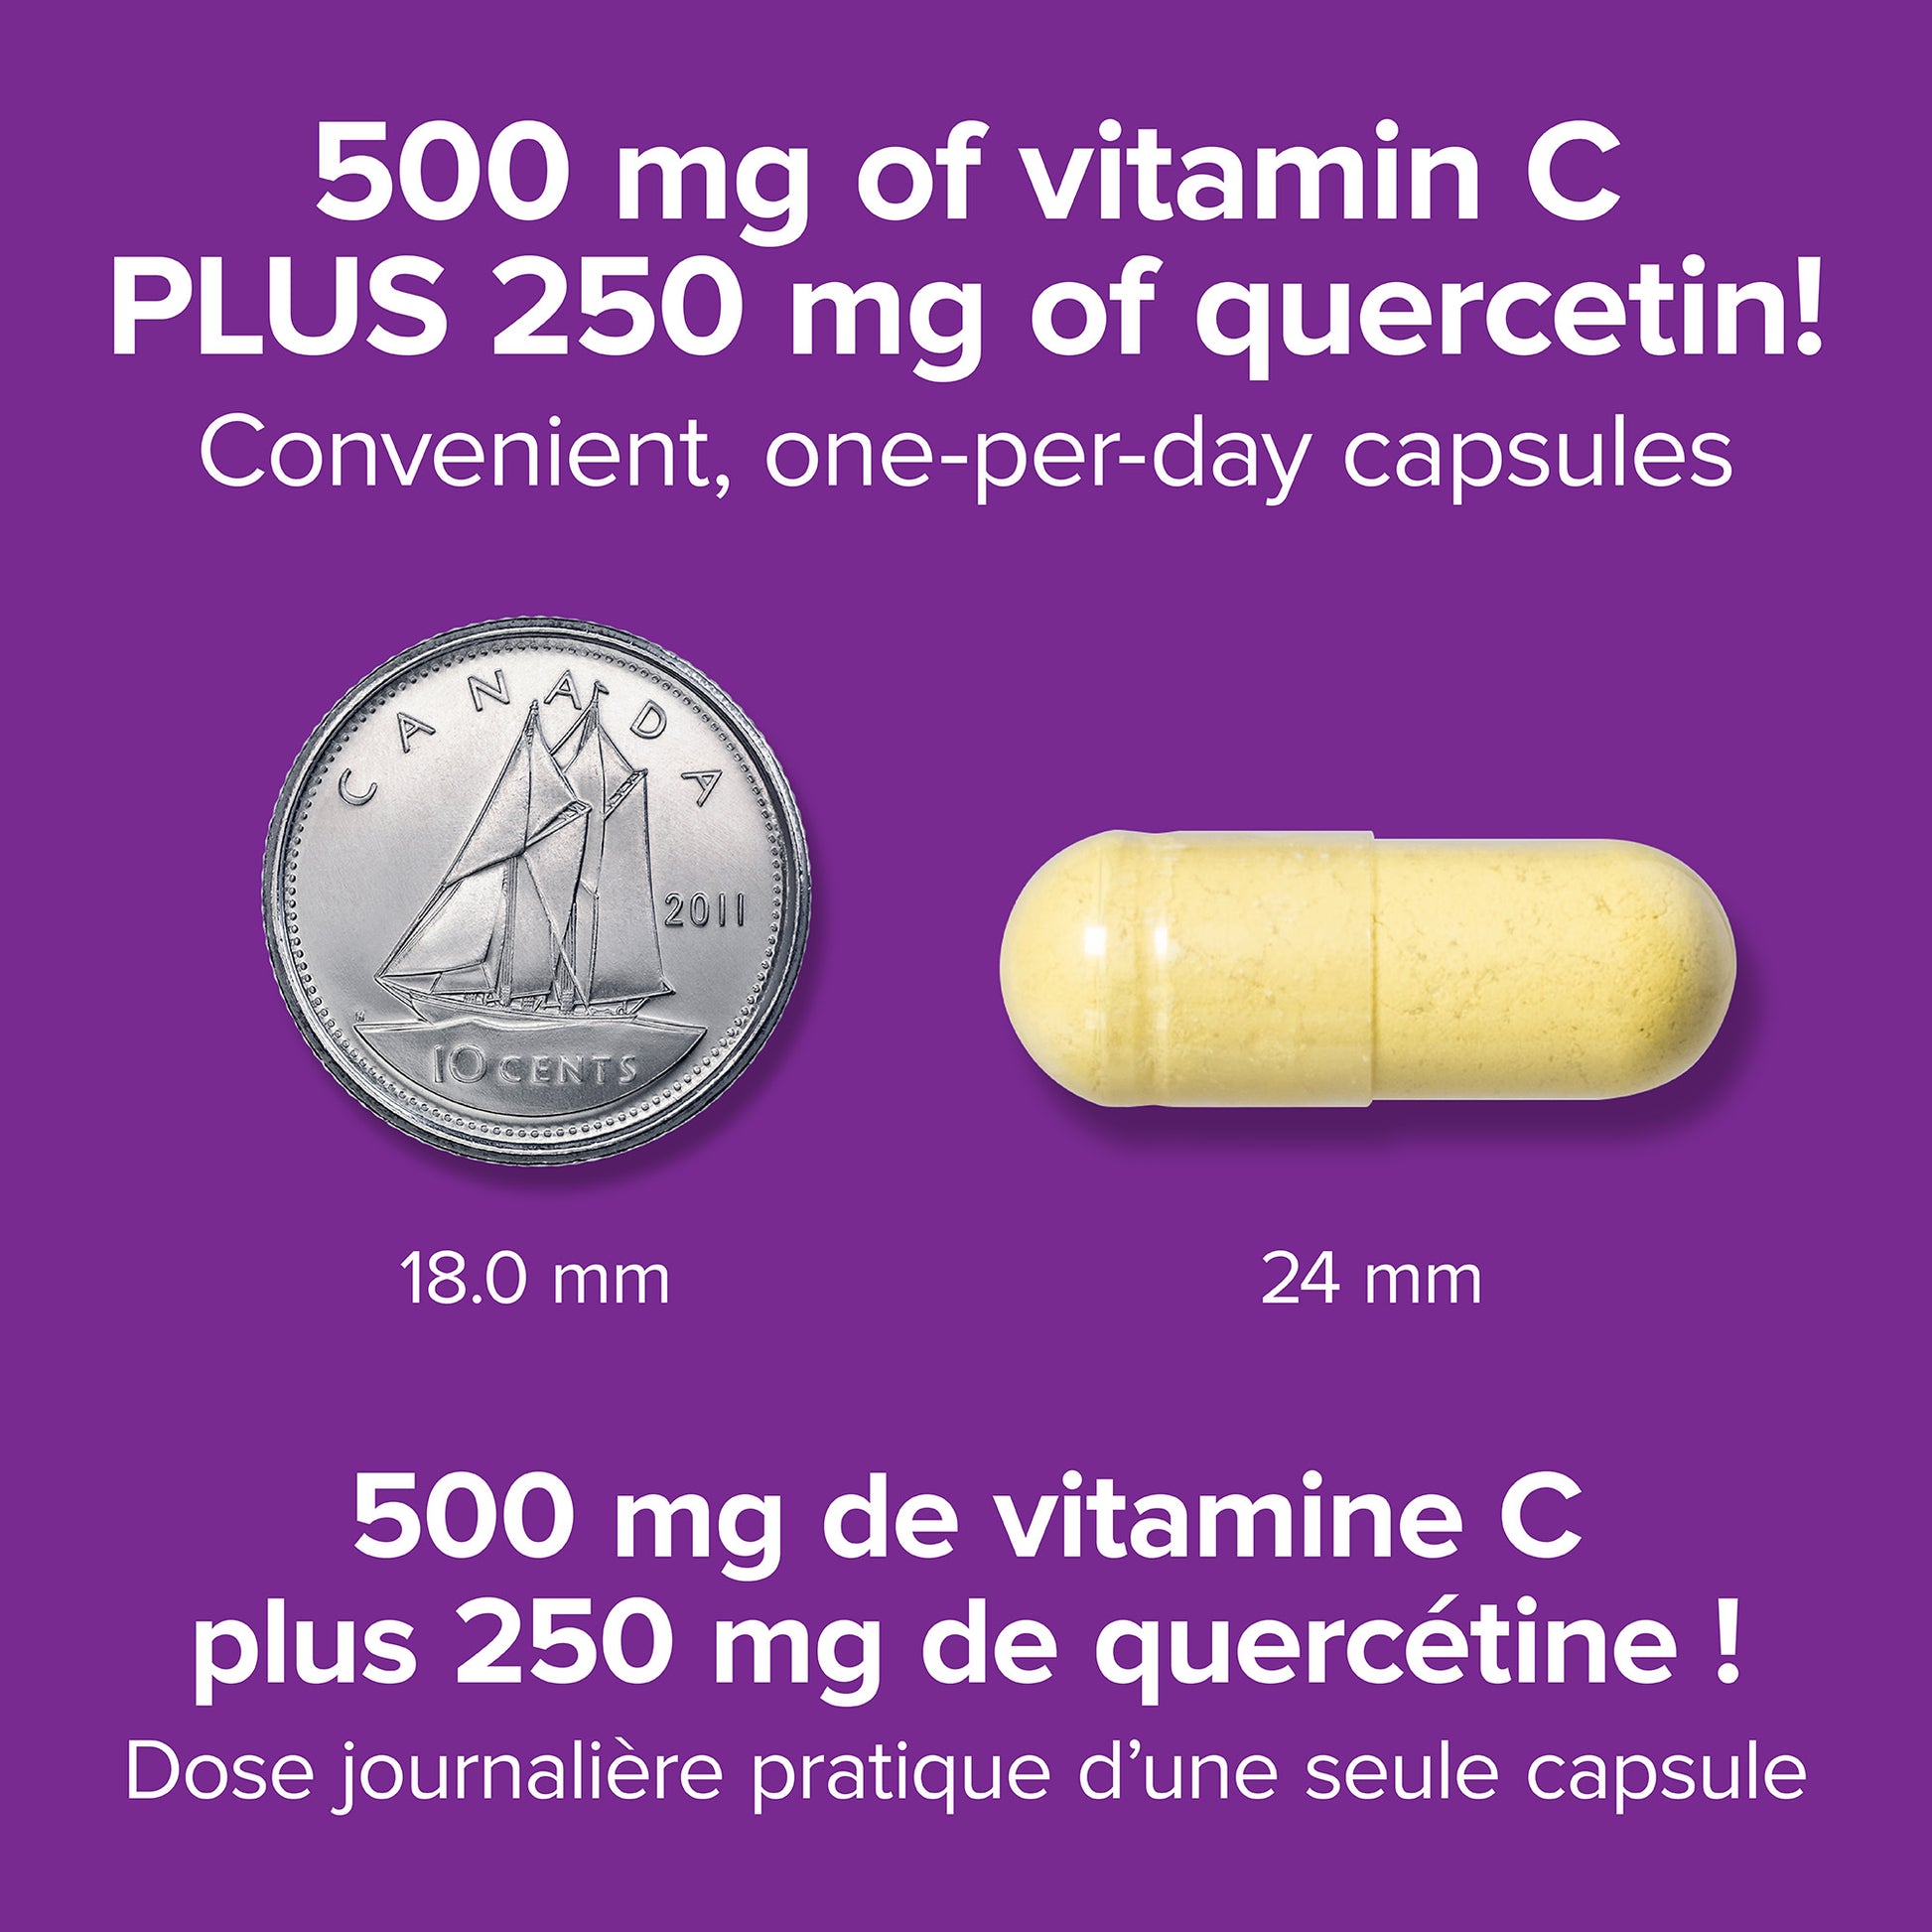 specifications-Vitamin C Plus Quercetin 500/250 mg for Webber NaturalsWN3698